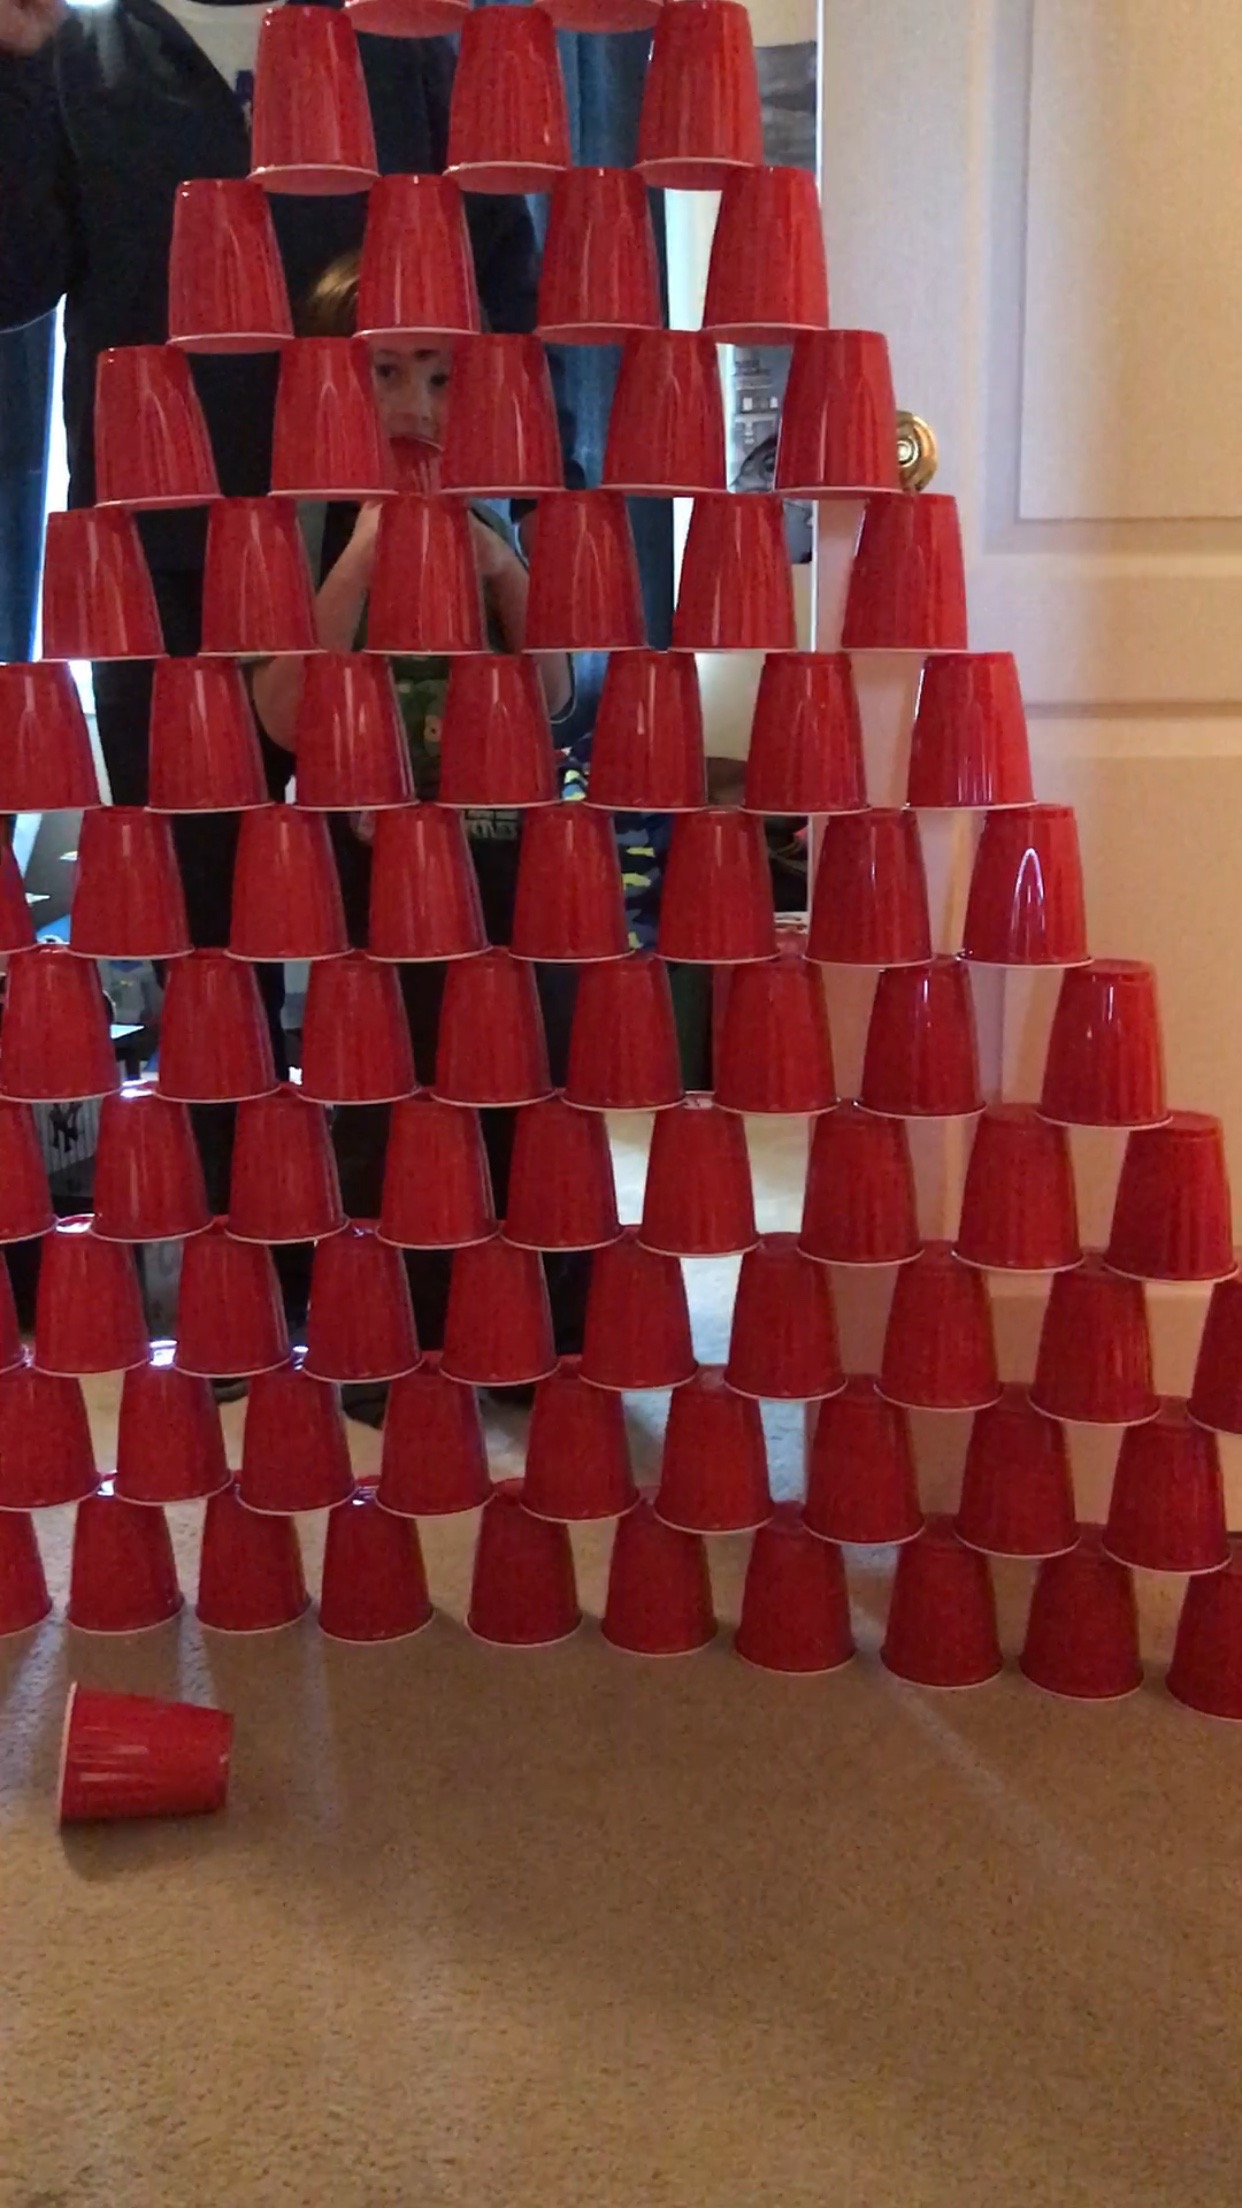 a pyramid of red cups